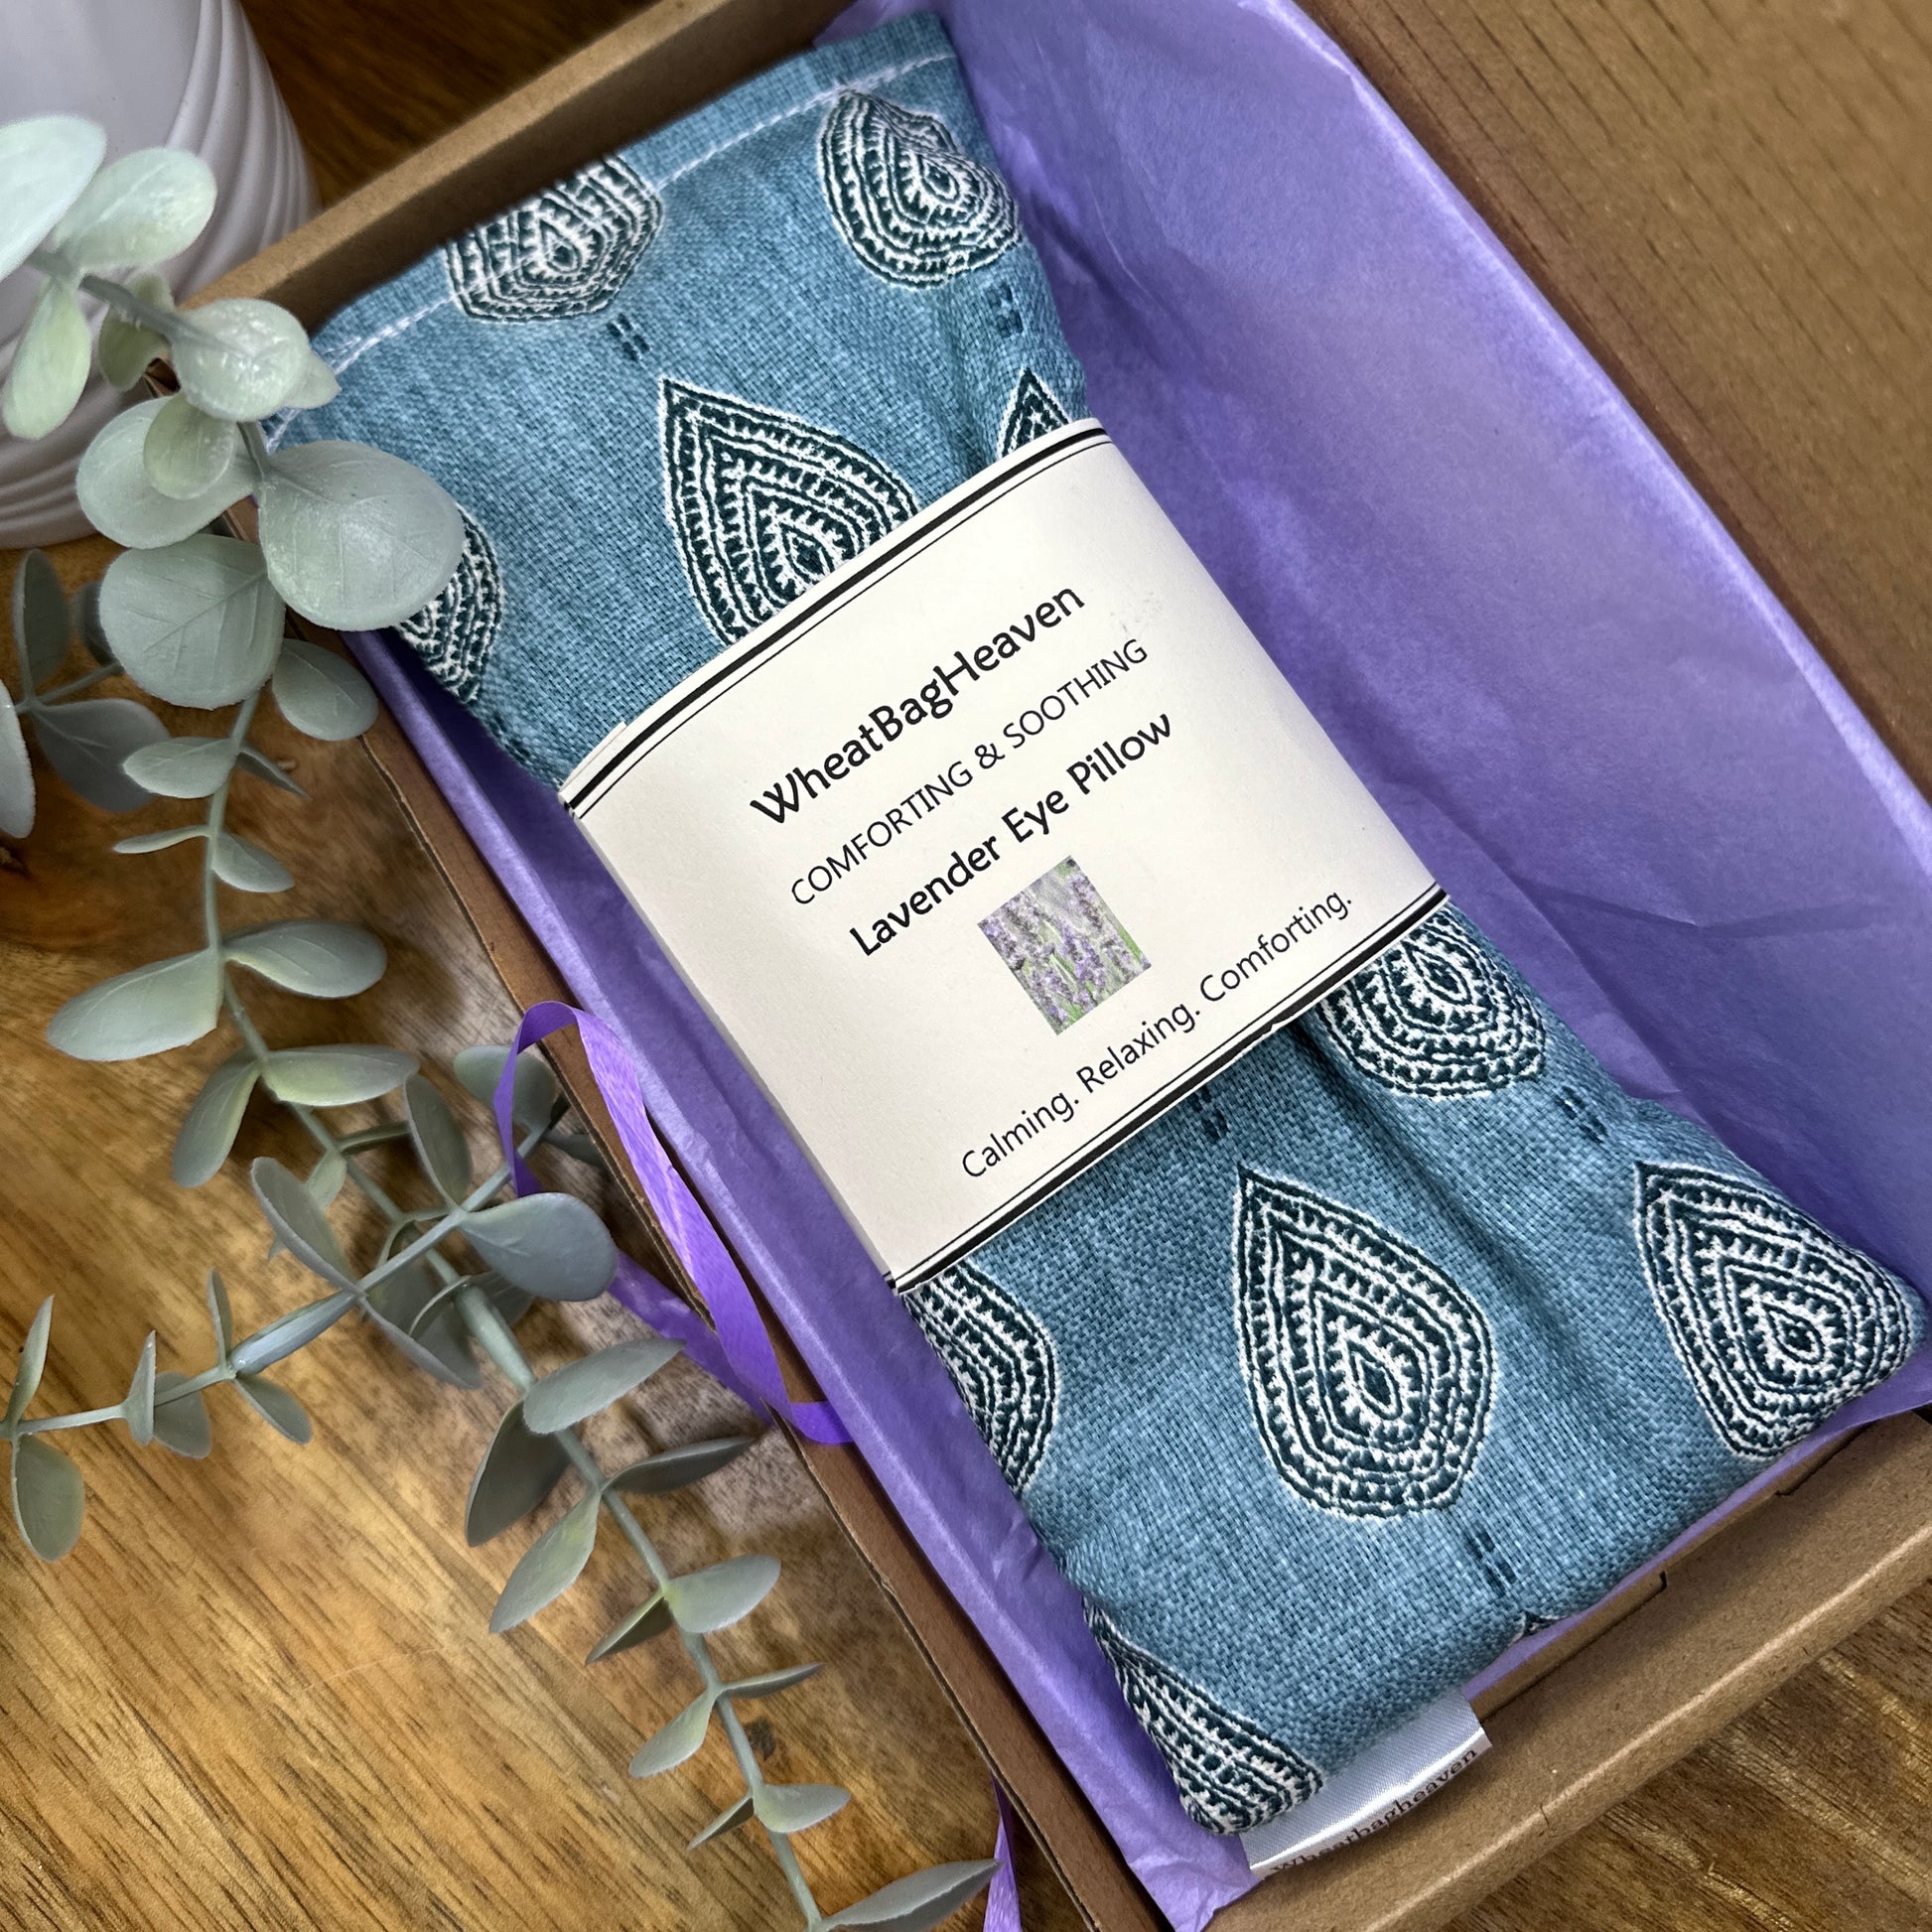 closer look at lavender scented eye pillow in a lovely teal blue print. packaged in a letterbox sized postal bix with tissue